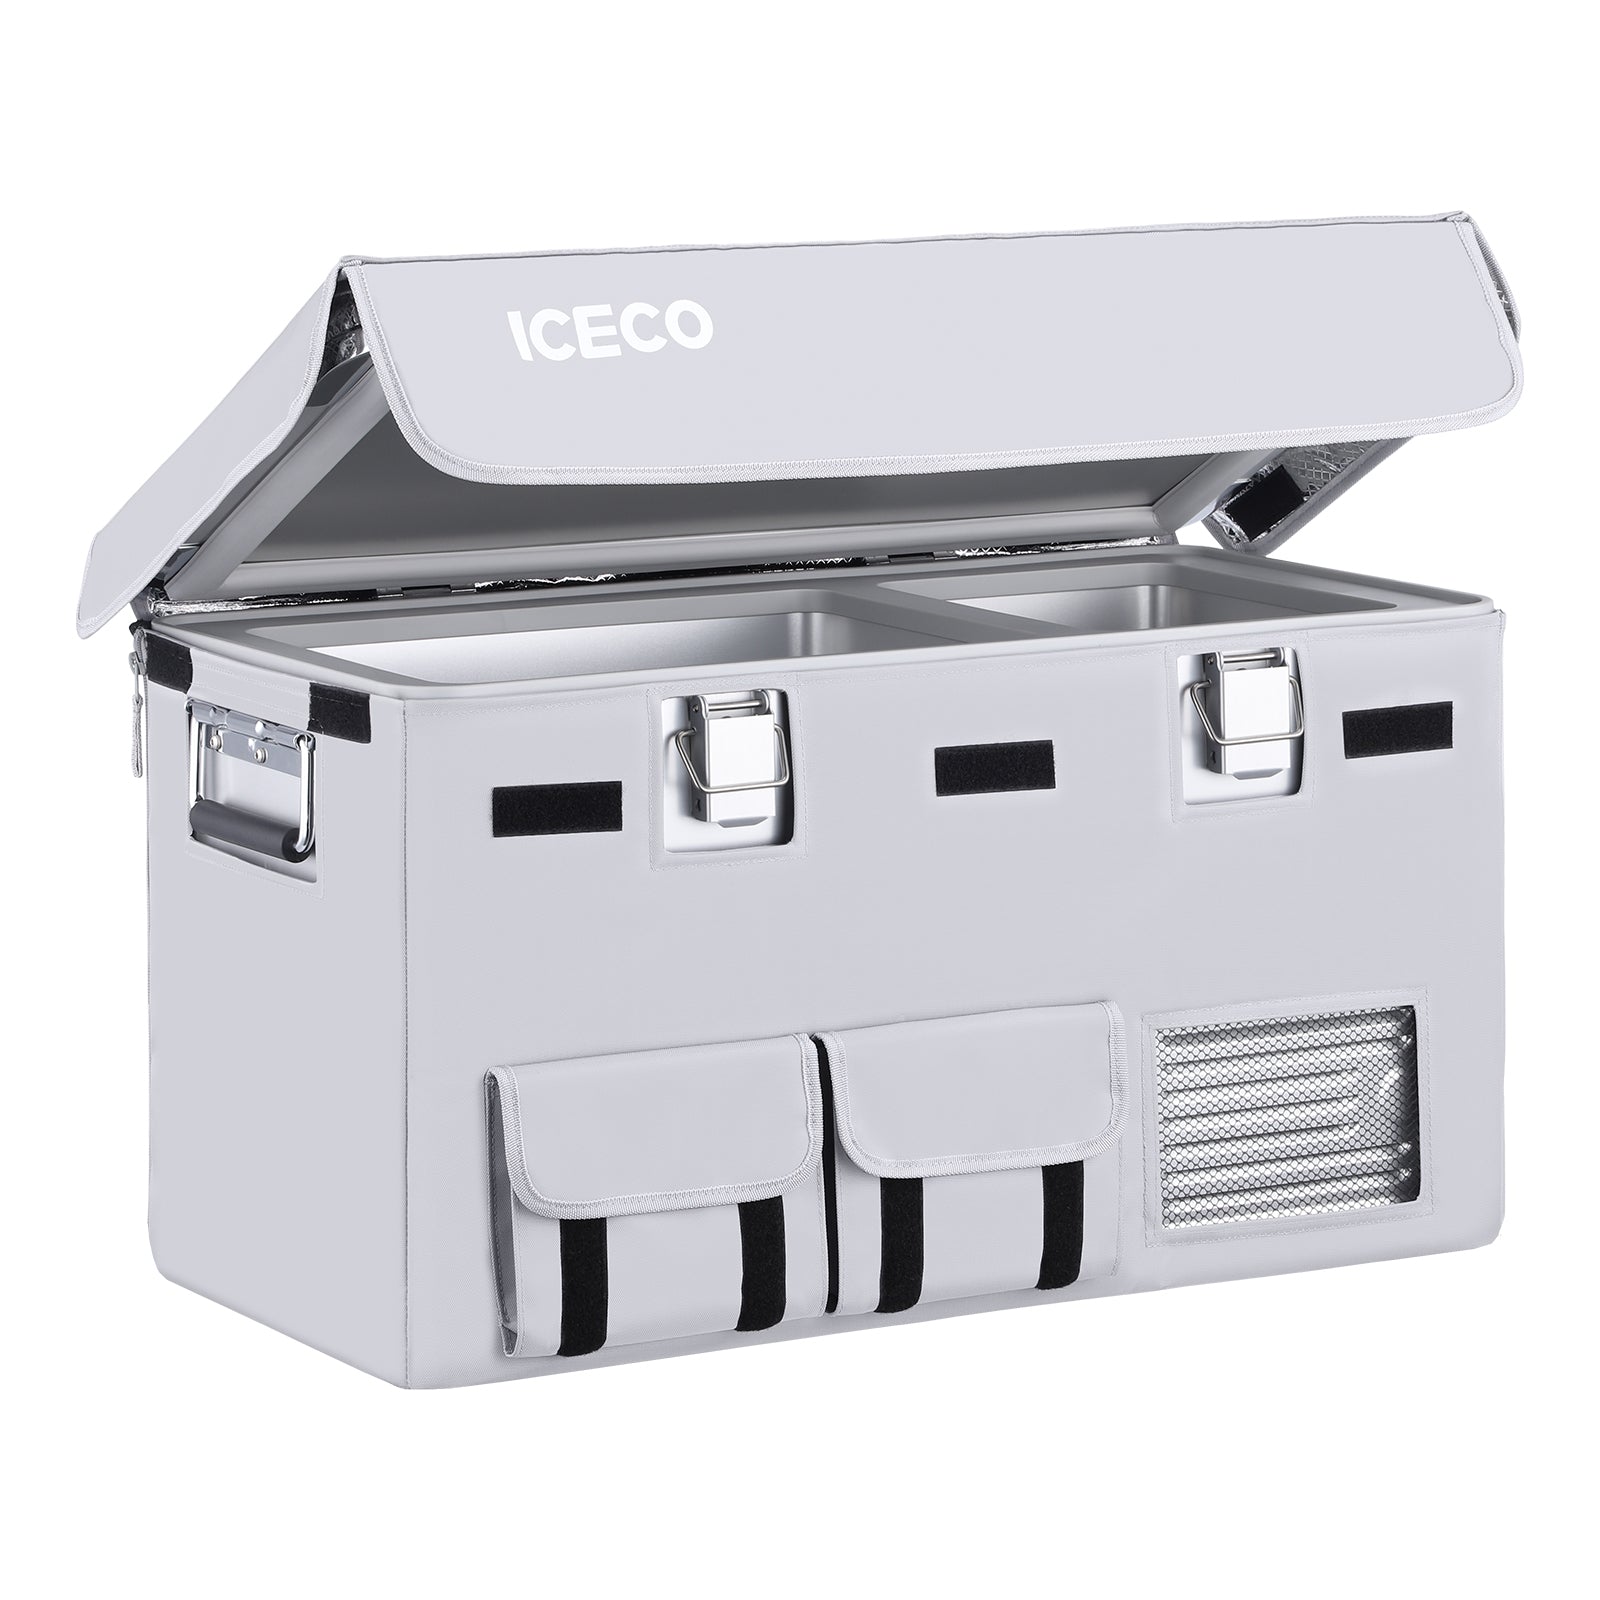 ICECO Upgraded Insulated Cover For VL35ProS-Insulated Cover-www.icecofreezer.com